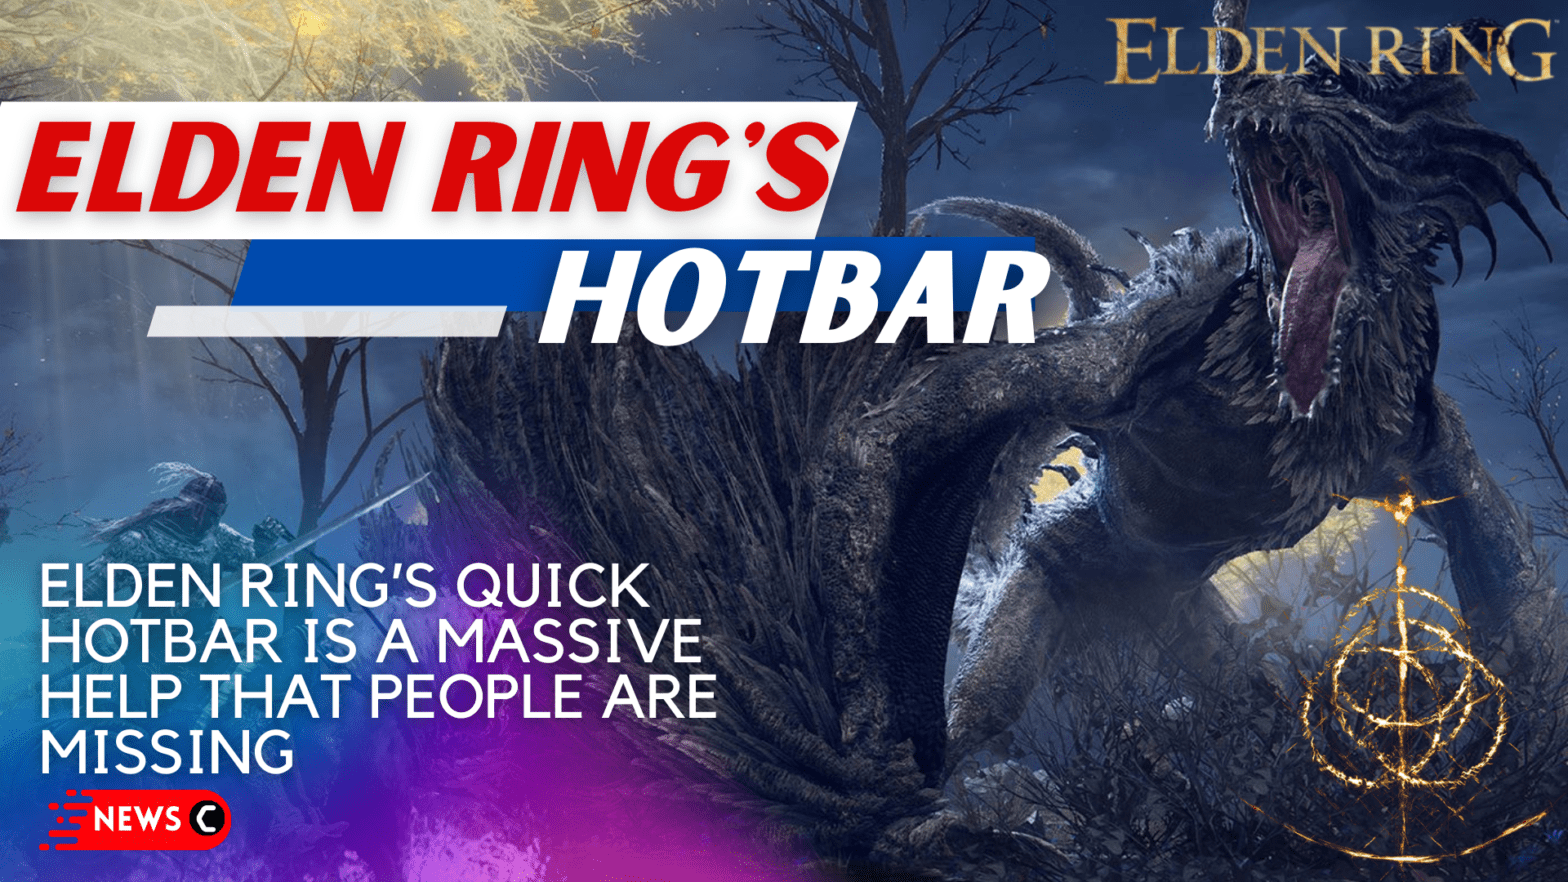 Elden Ring’s quick hotbar is a massive help that people are missing